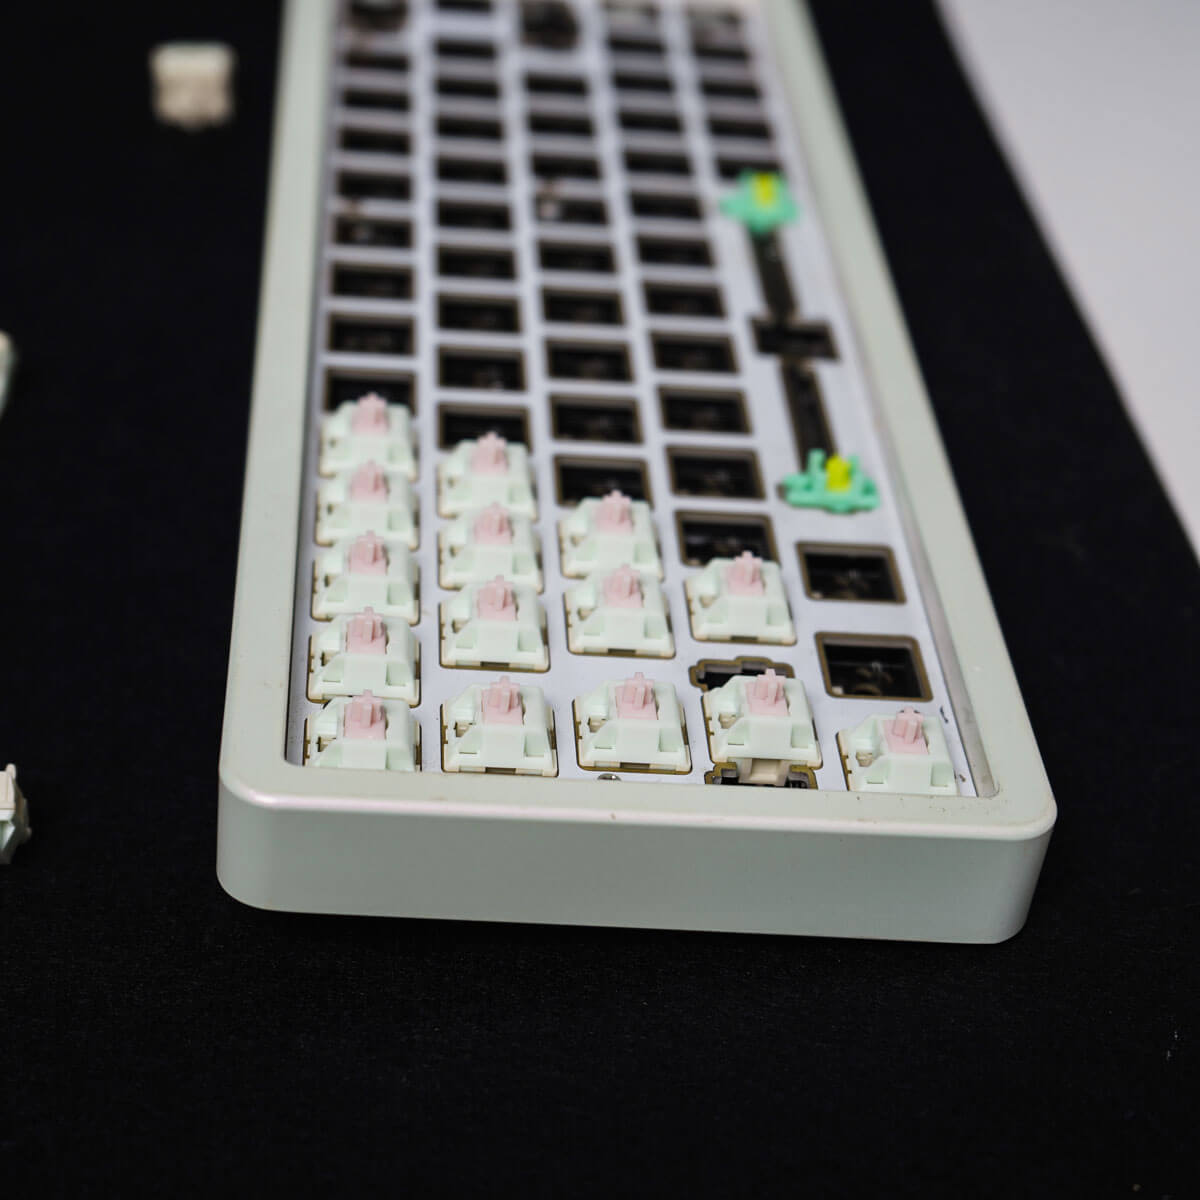 PH Meow Meow Linear Switch 5 pin Switch for Mechanical Keyboard